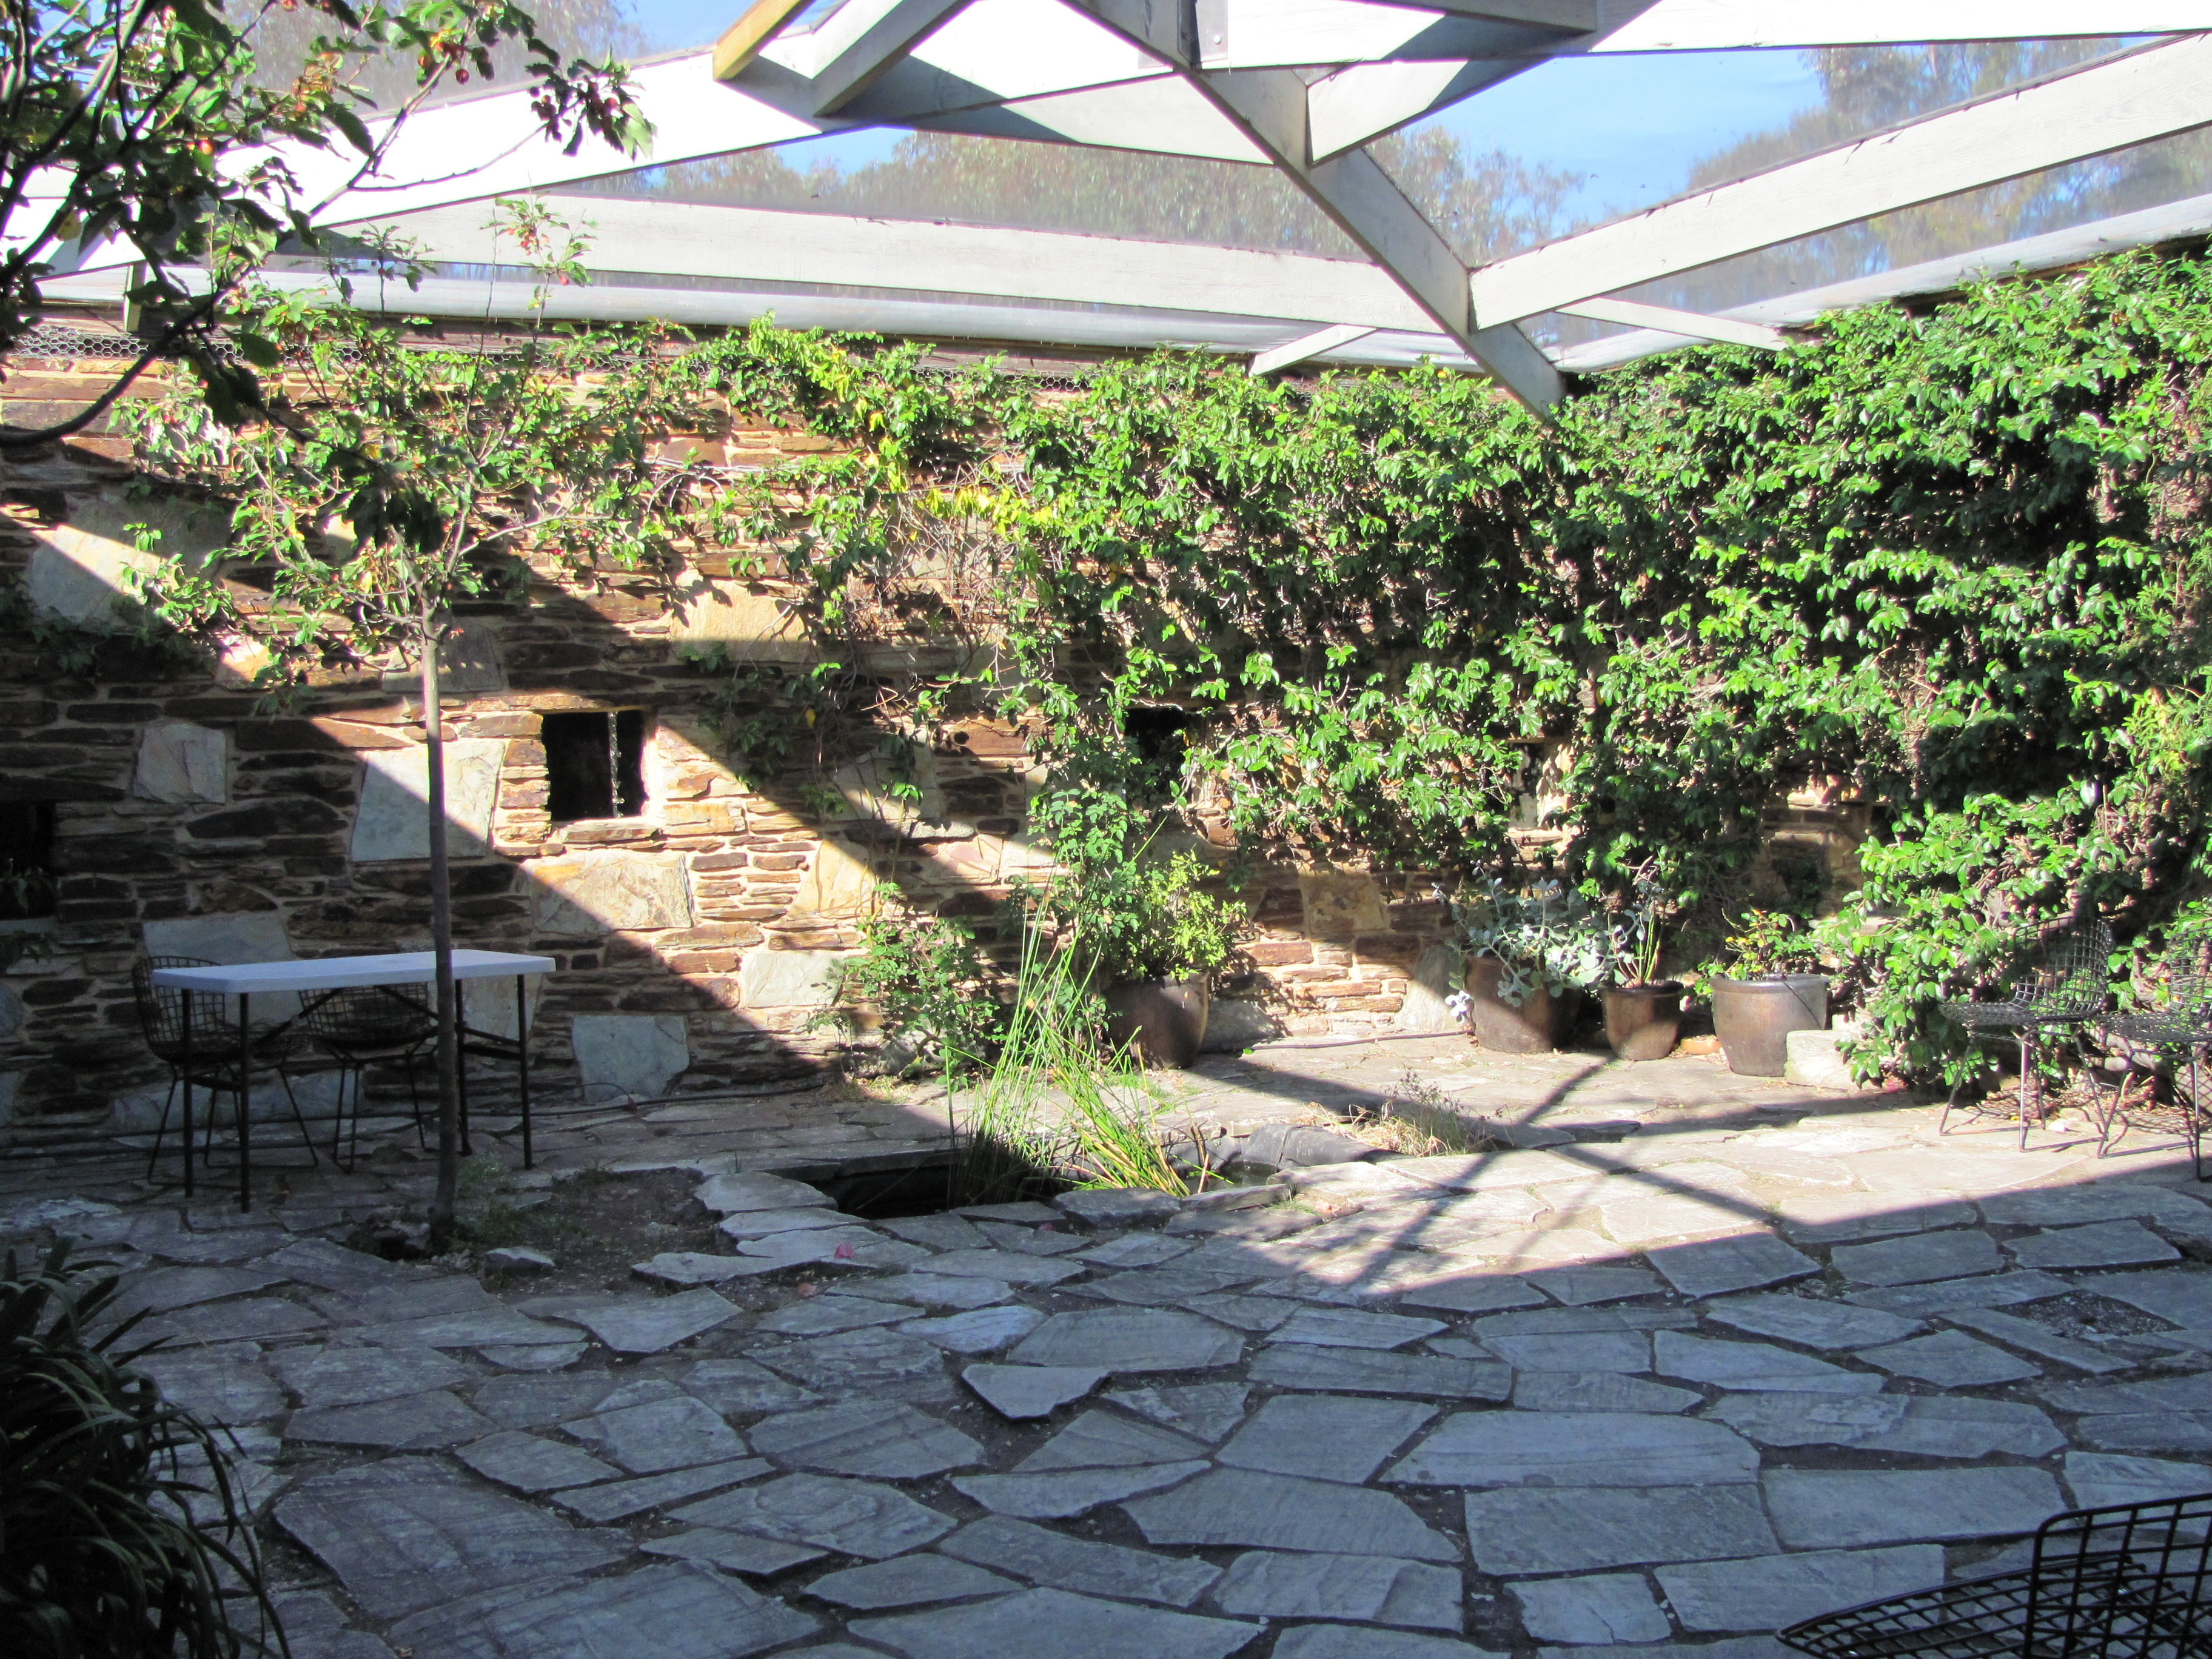 Courtyard with living wall and stone paving